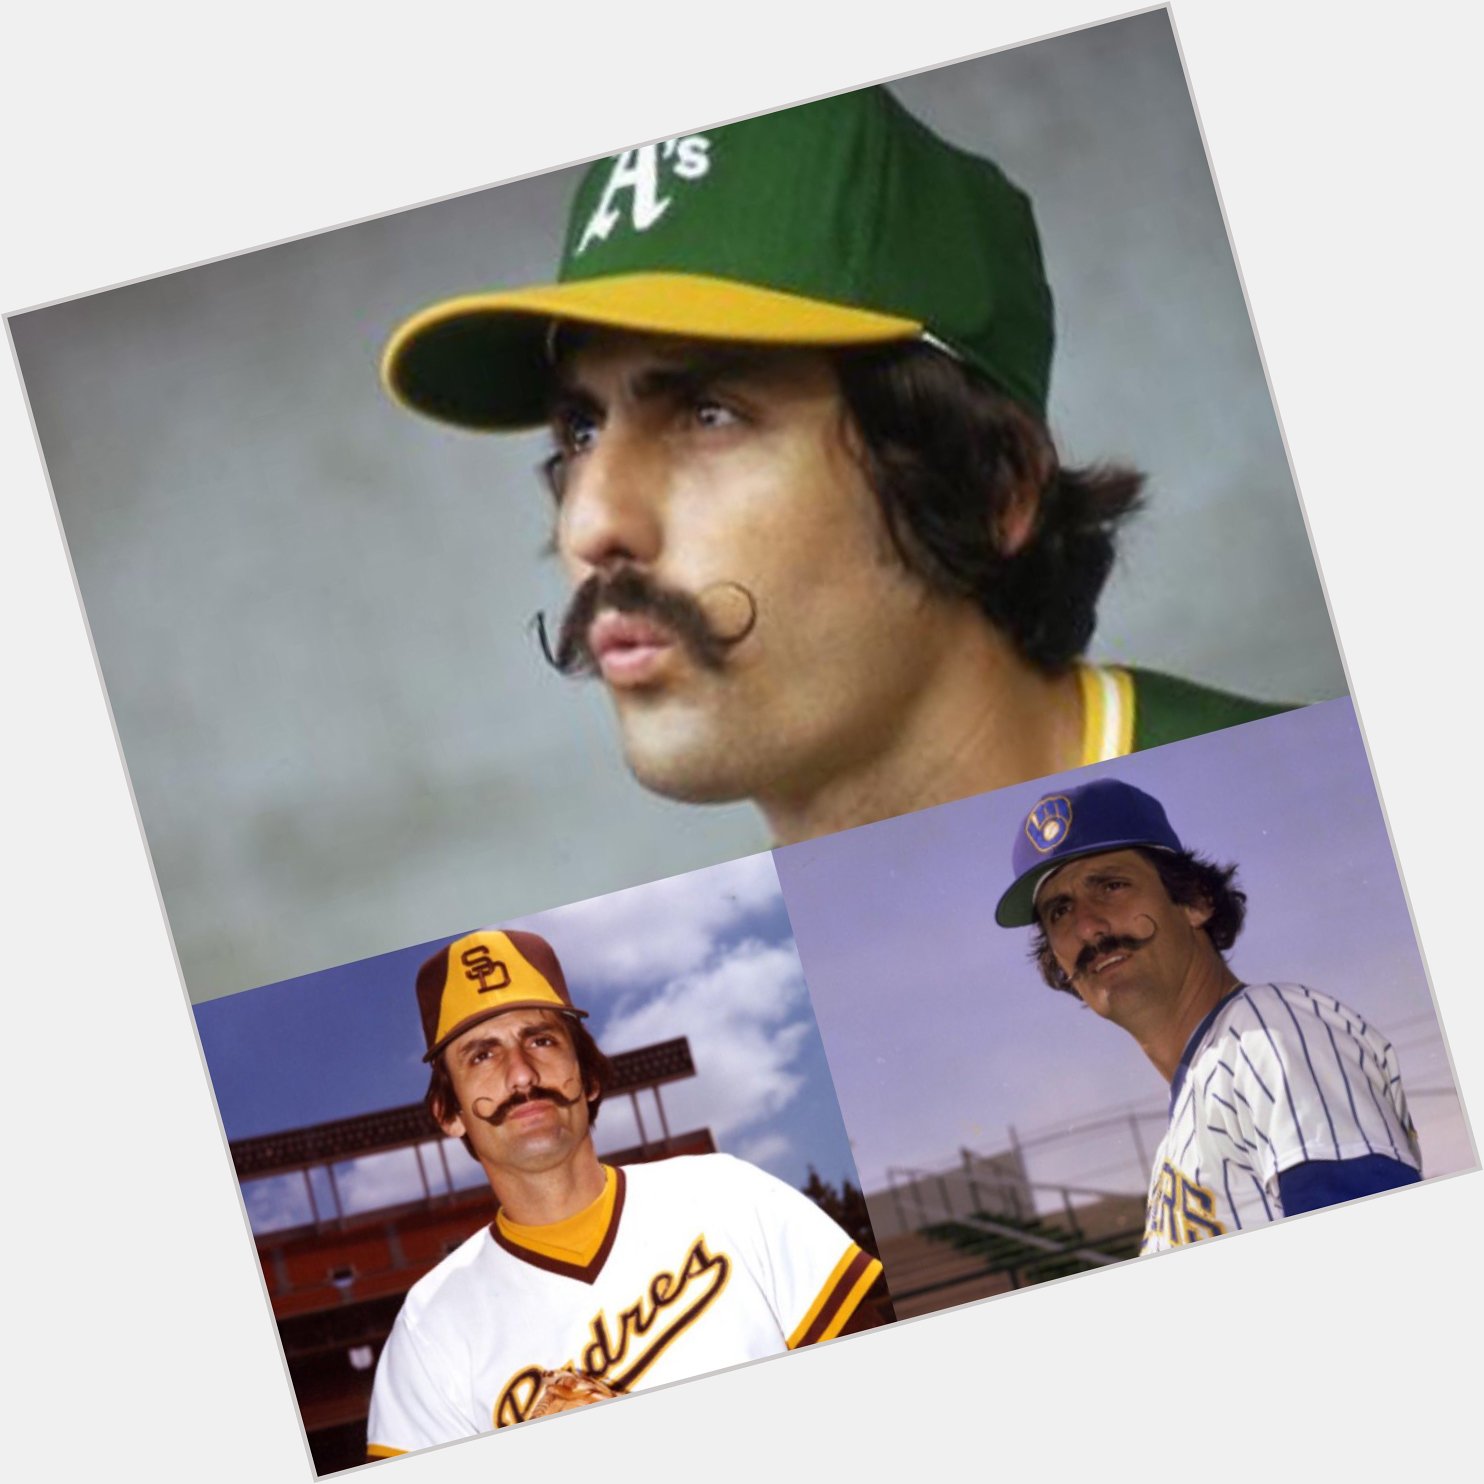 Happy birthday to Hall of Famer Rollie Fingers 